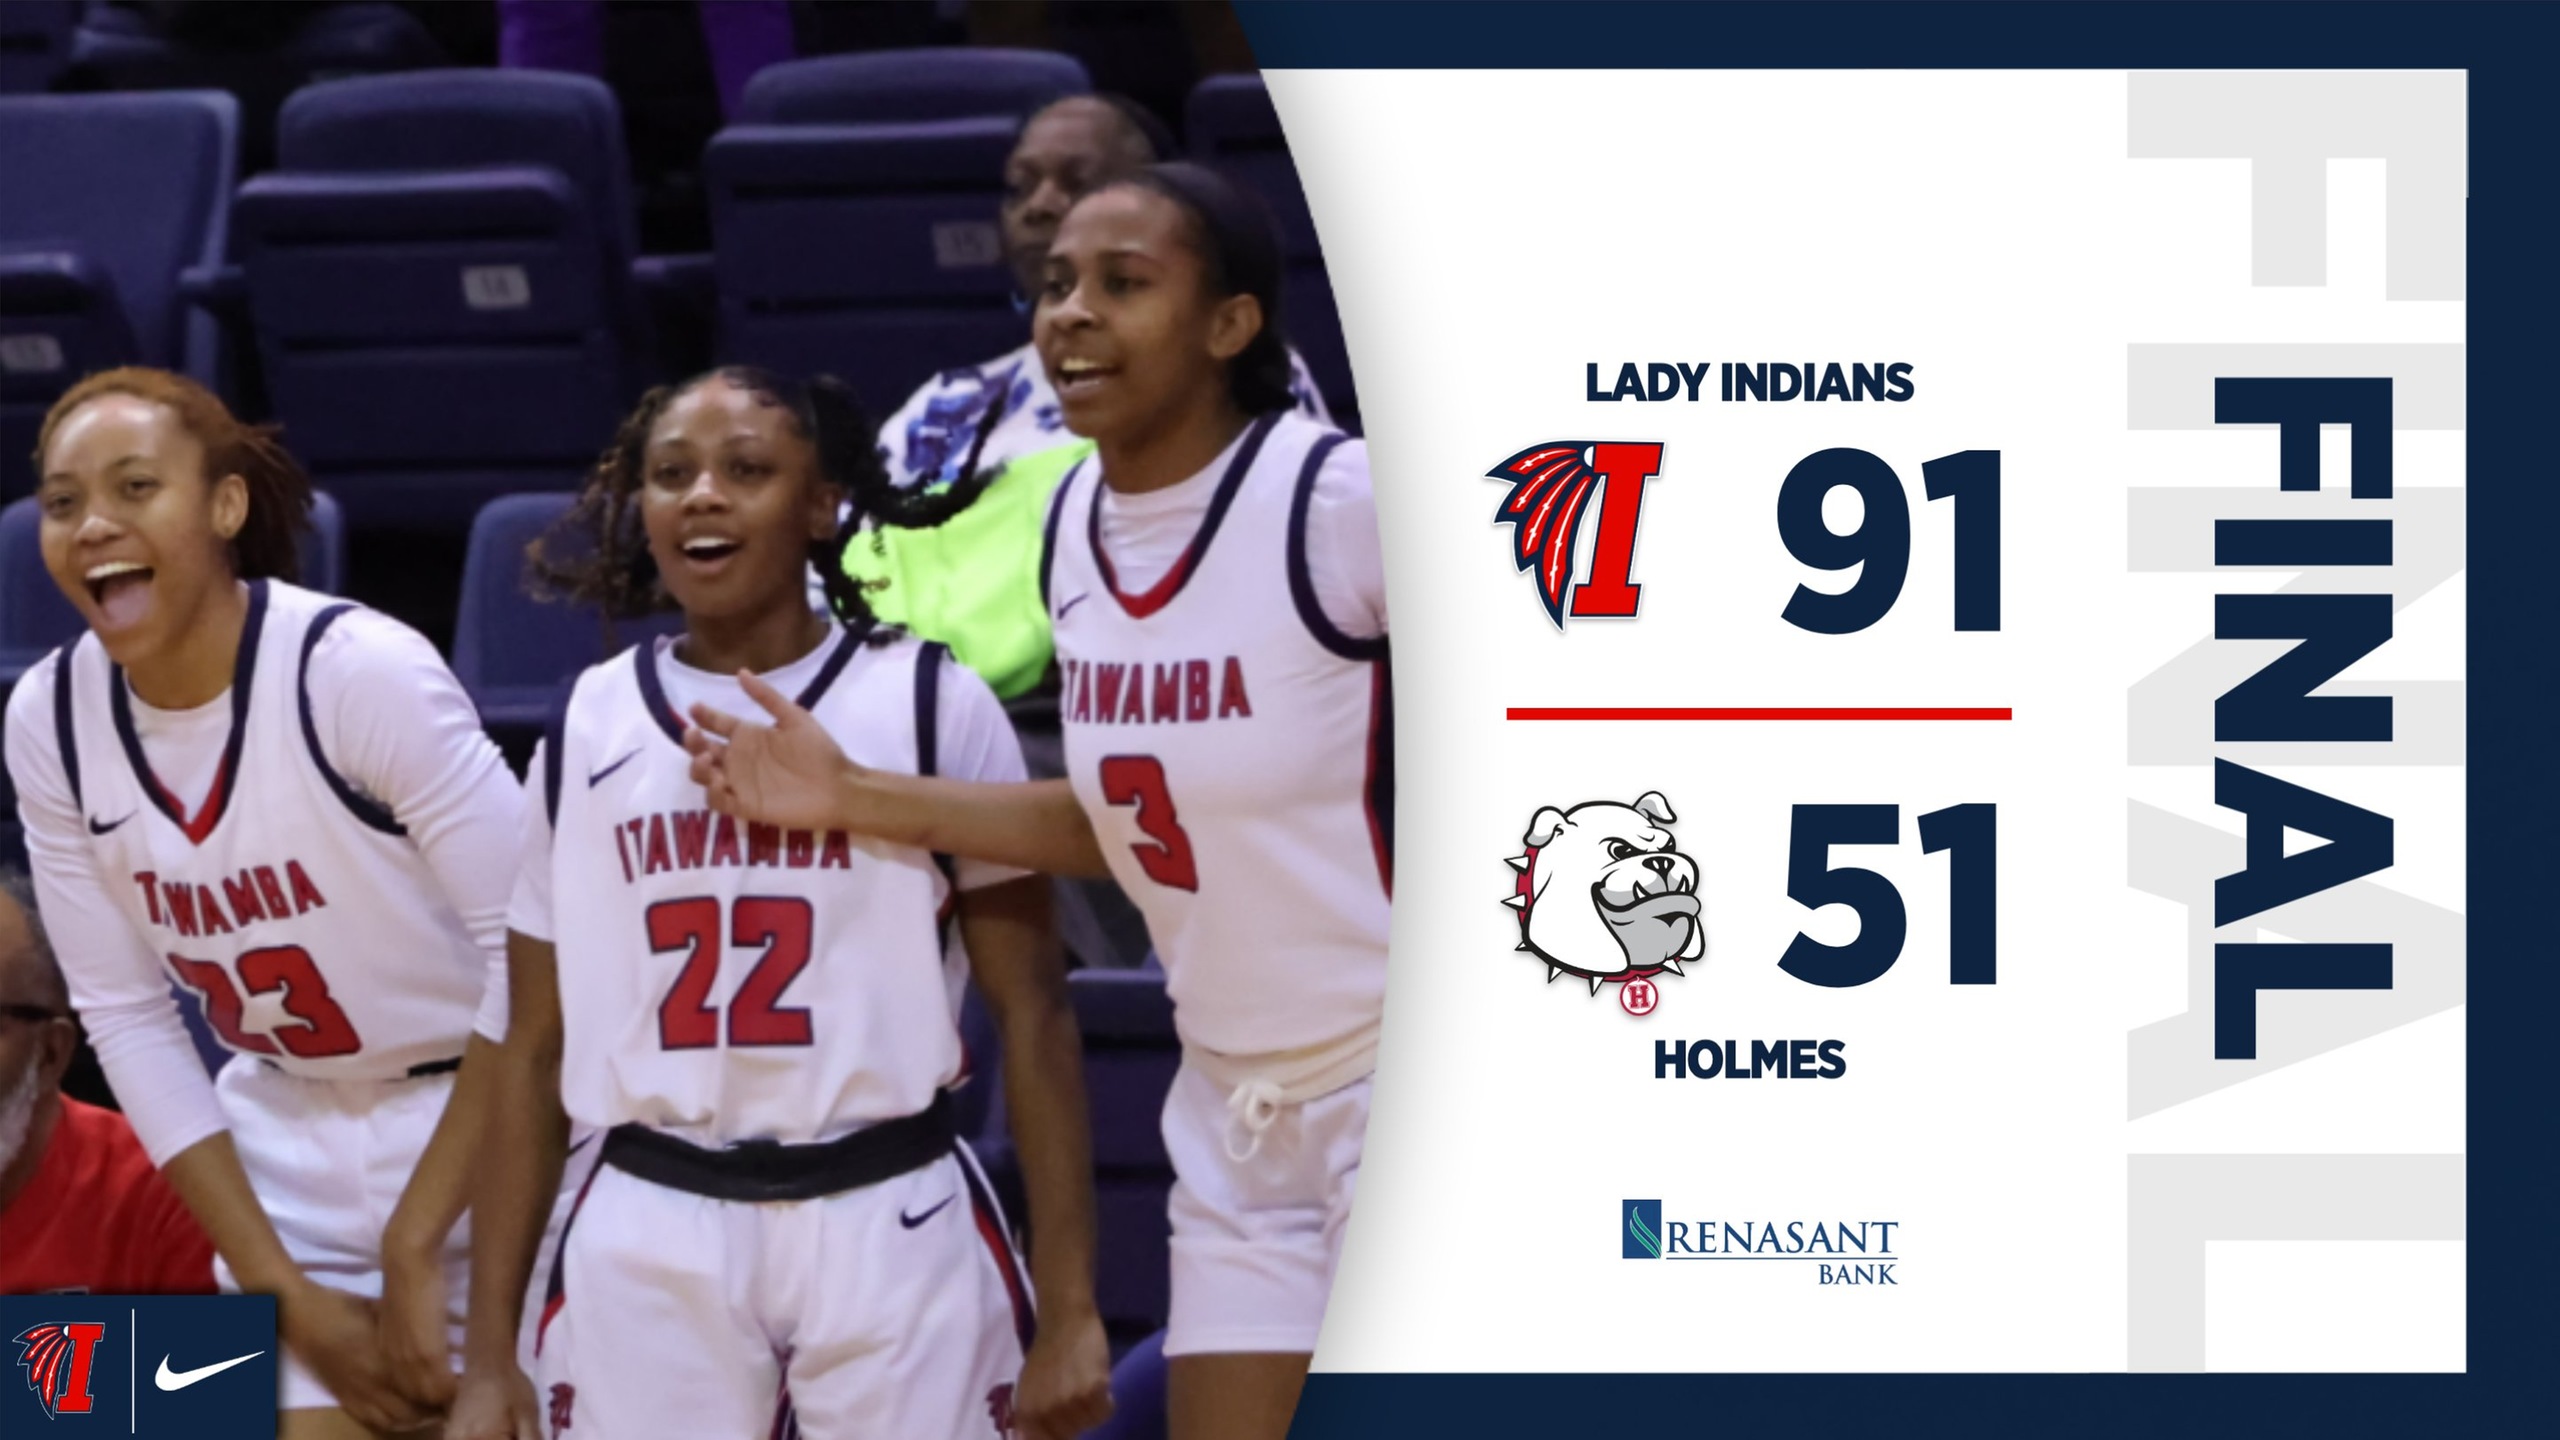 Lady Indians take care of Holmes, 91-51